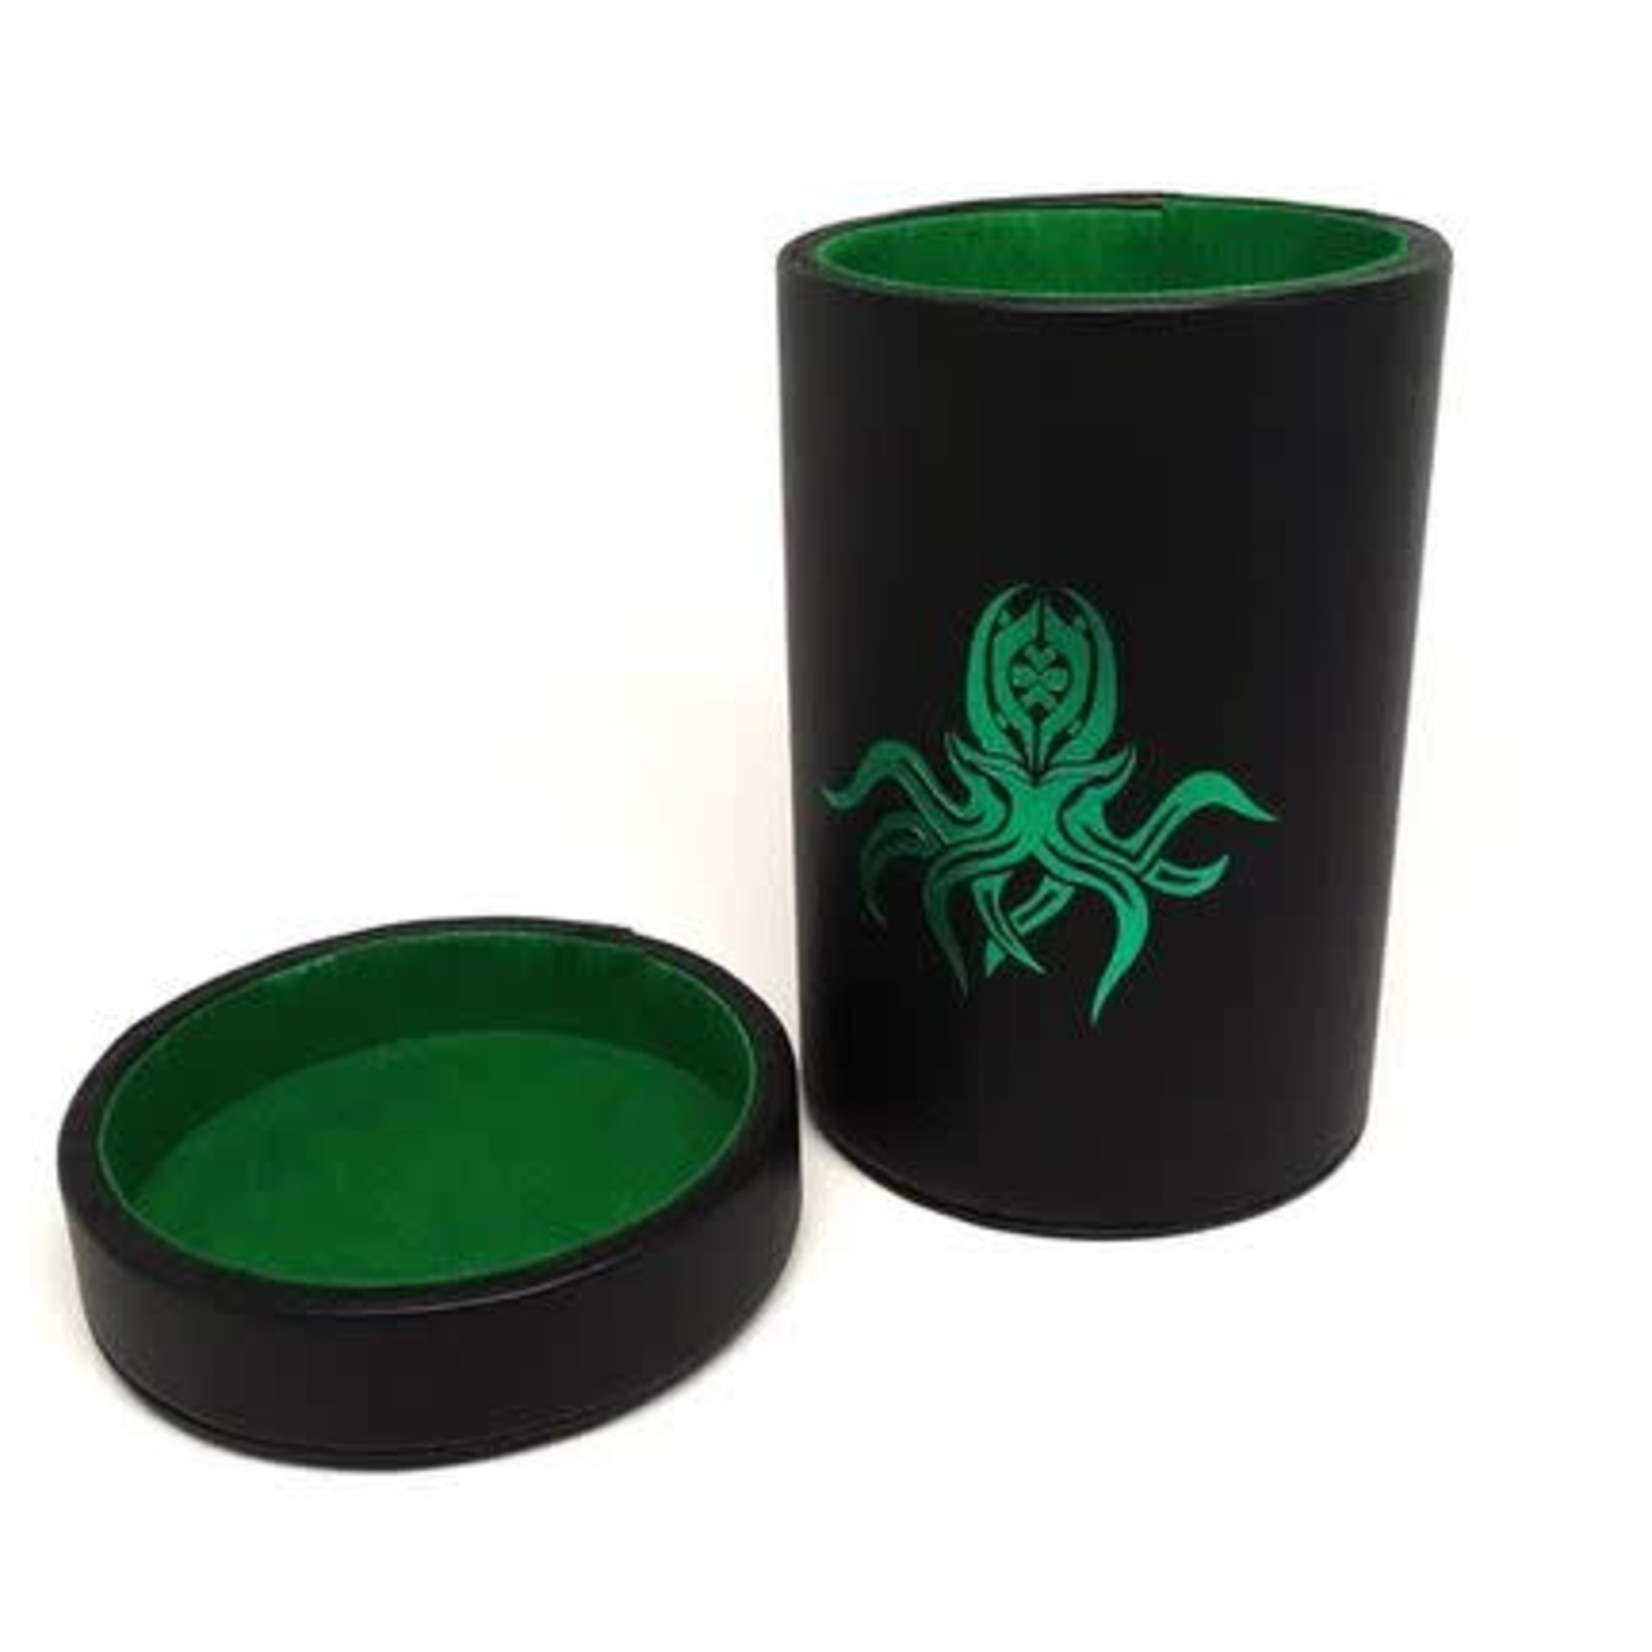 Dice Cup: Over Sized Black - Cthulhu